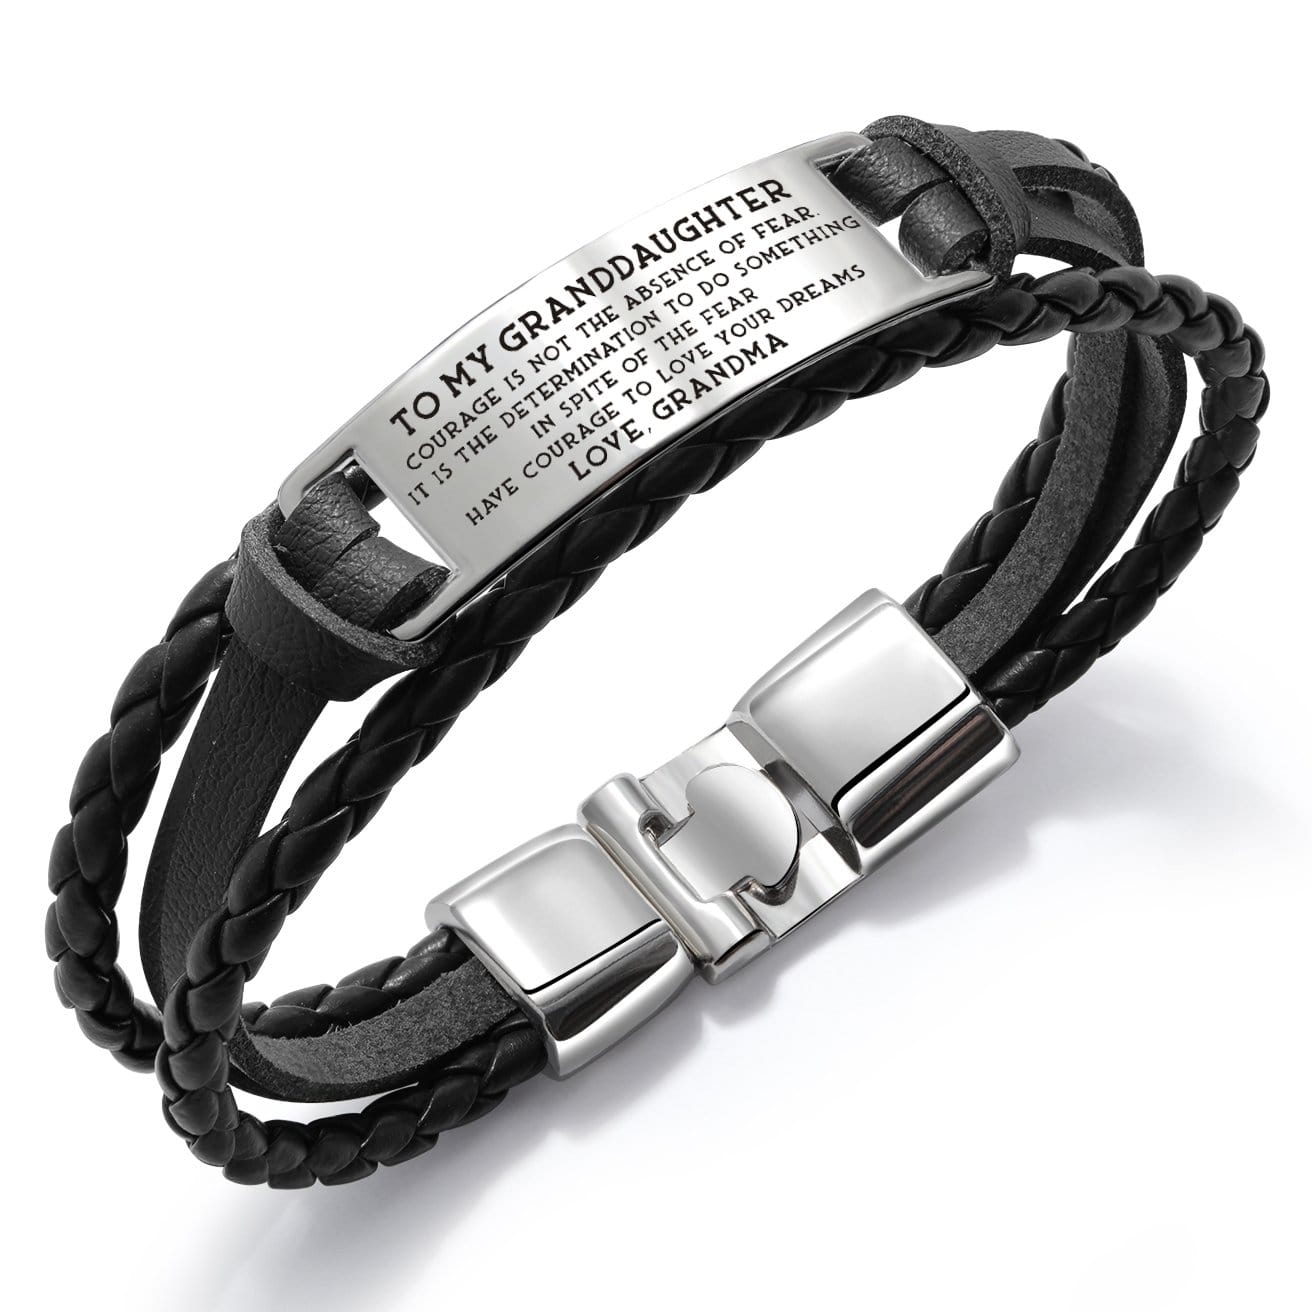 Bracelets Grandma To Granddaughter - To Love Your Dreams Leather Bracelet Black GiveMe-Gifts